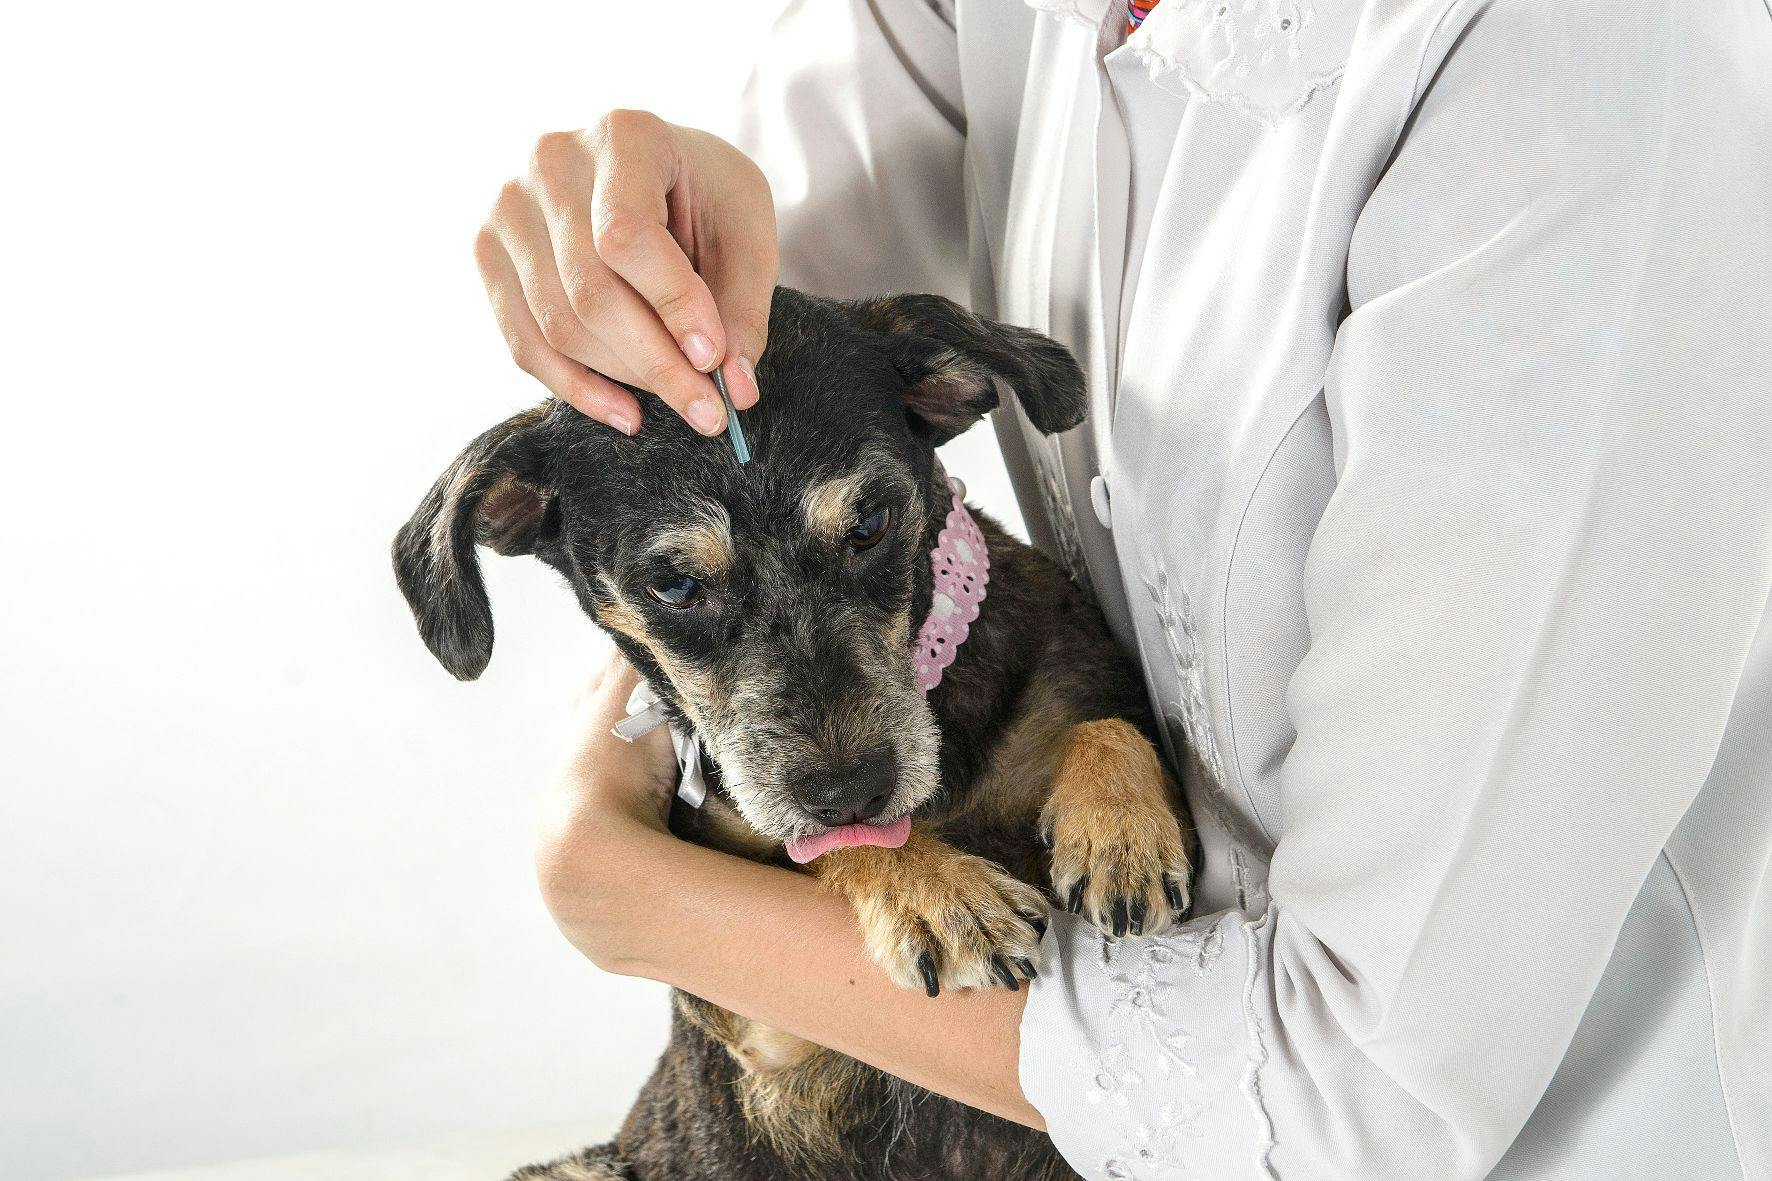 VetAcupuncture_Treatment: A certified veterinarian performing acupuncture on a relaxed dog